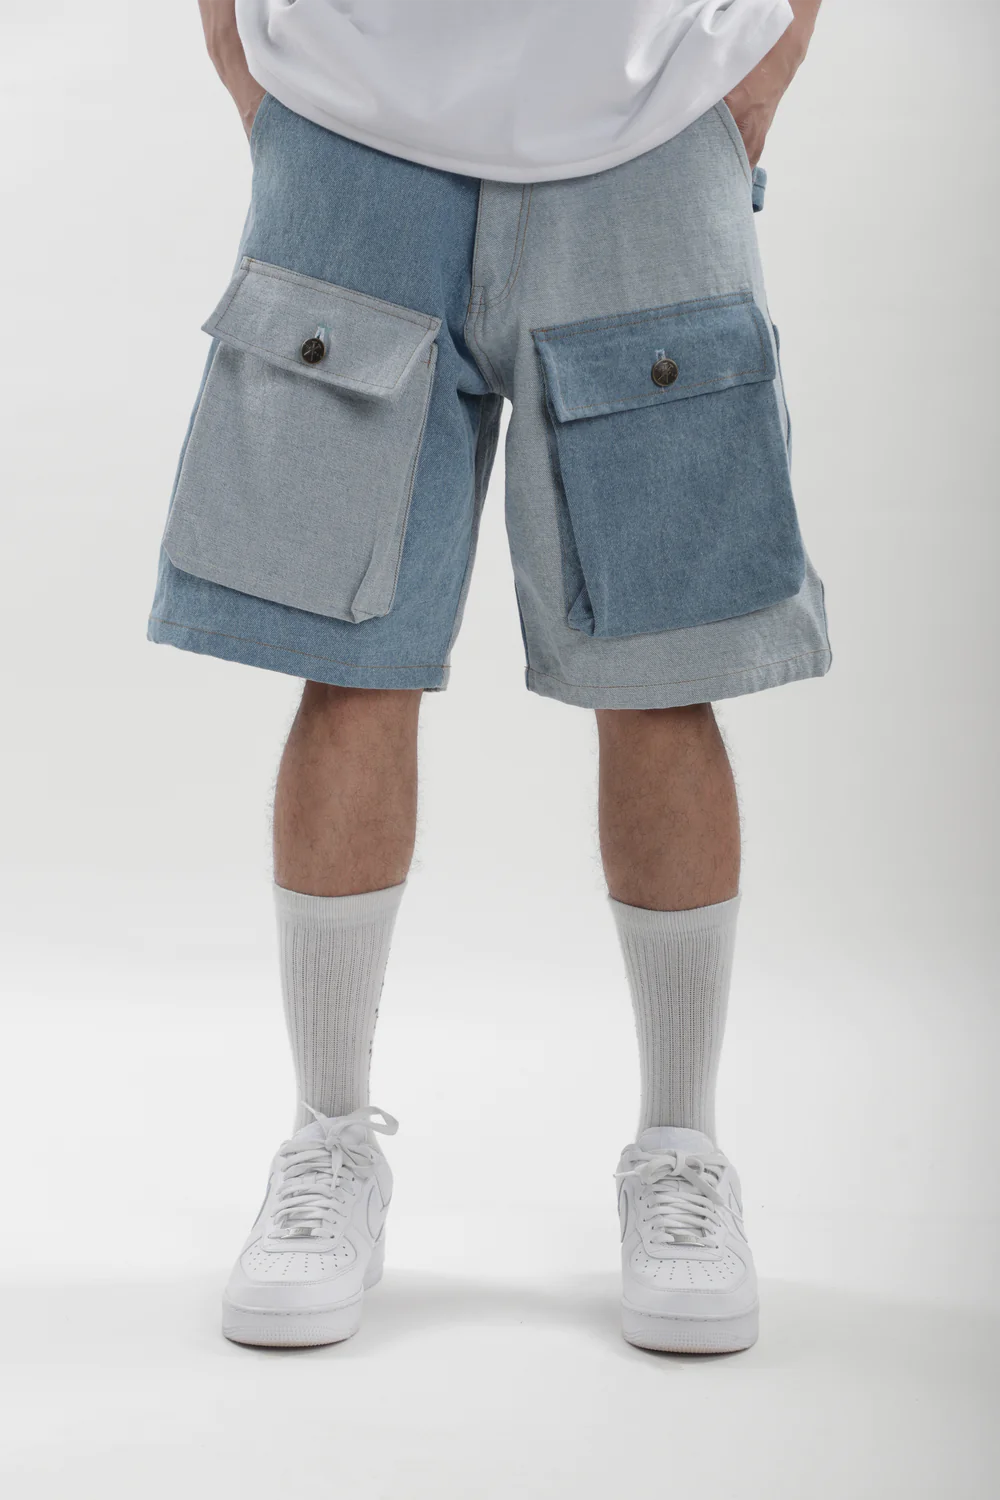 Denim Carpenter Shorts, a product by TOFFLE